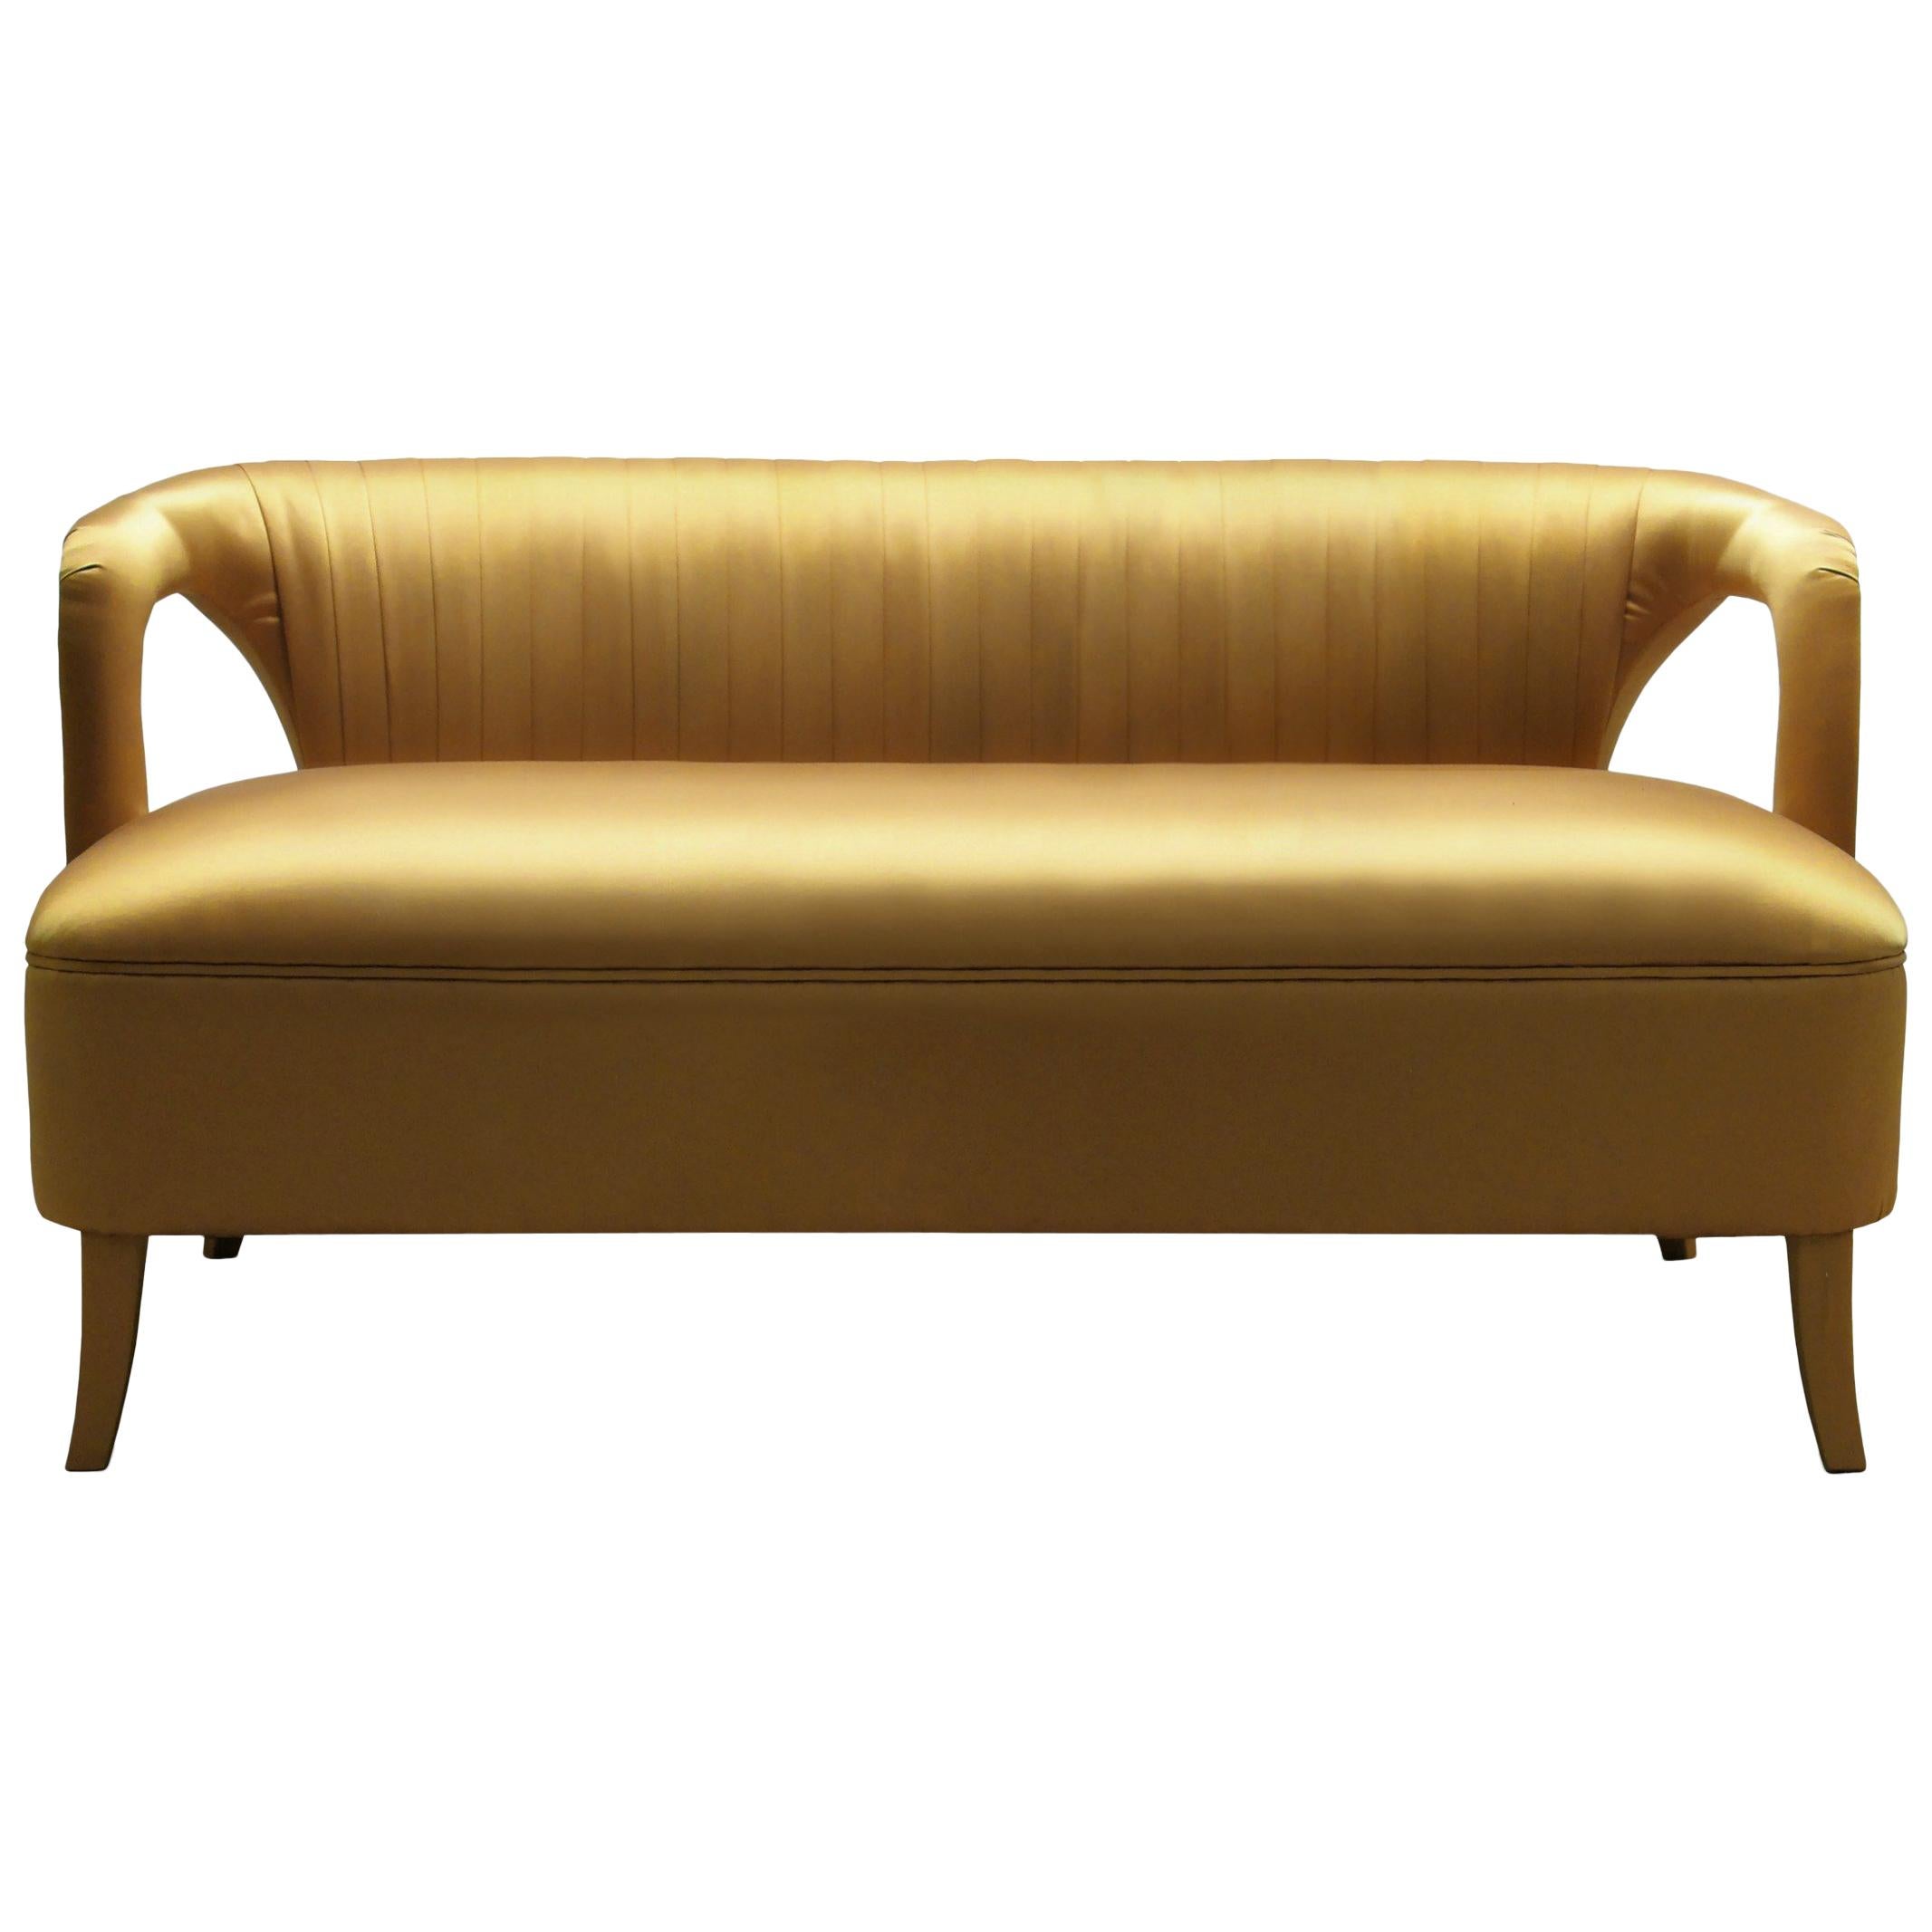 Karoo Sofa and Loveseat in Gold Satin With Fully Upholstered Legs by Brabbu For Sale